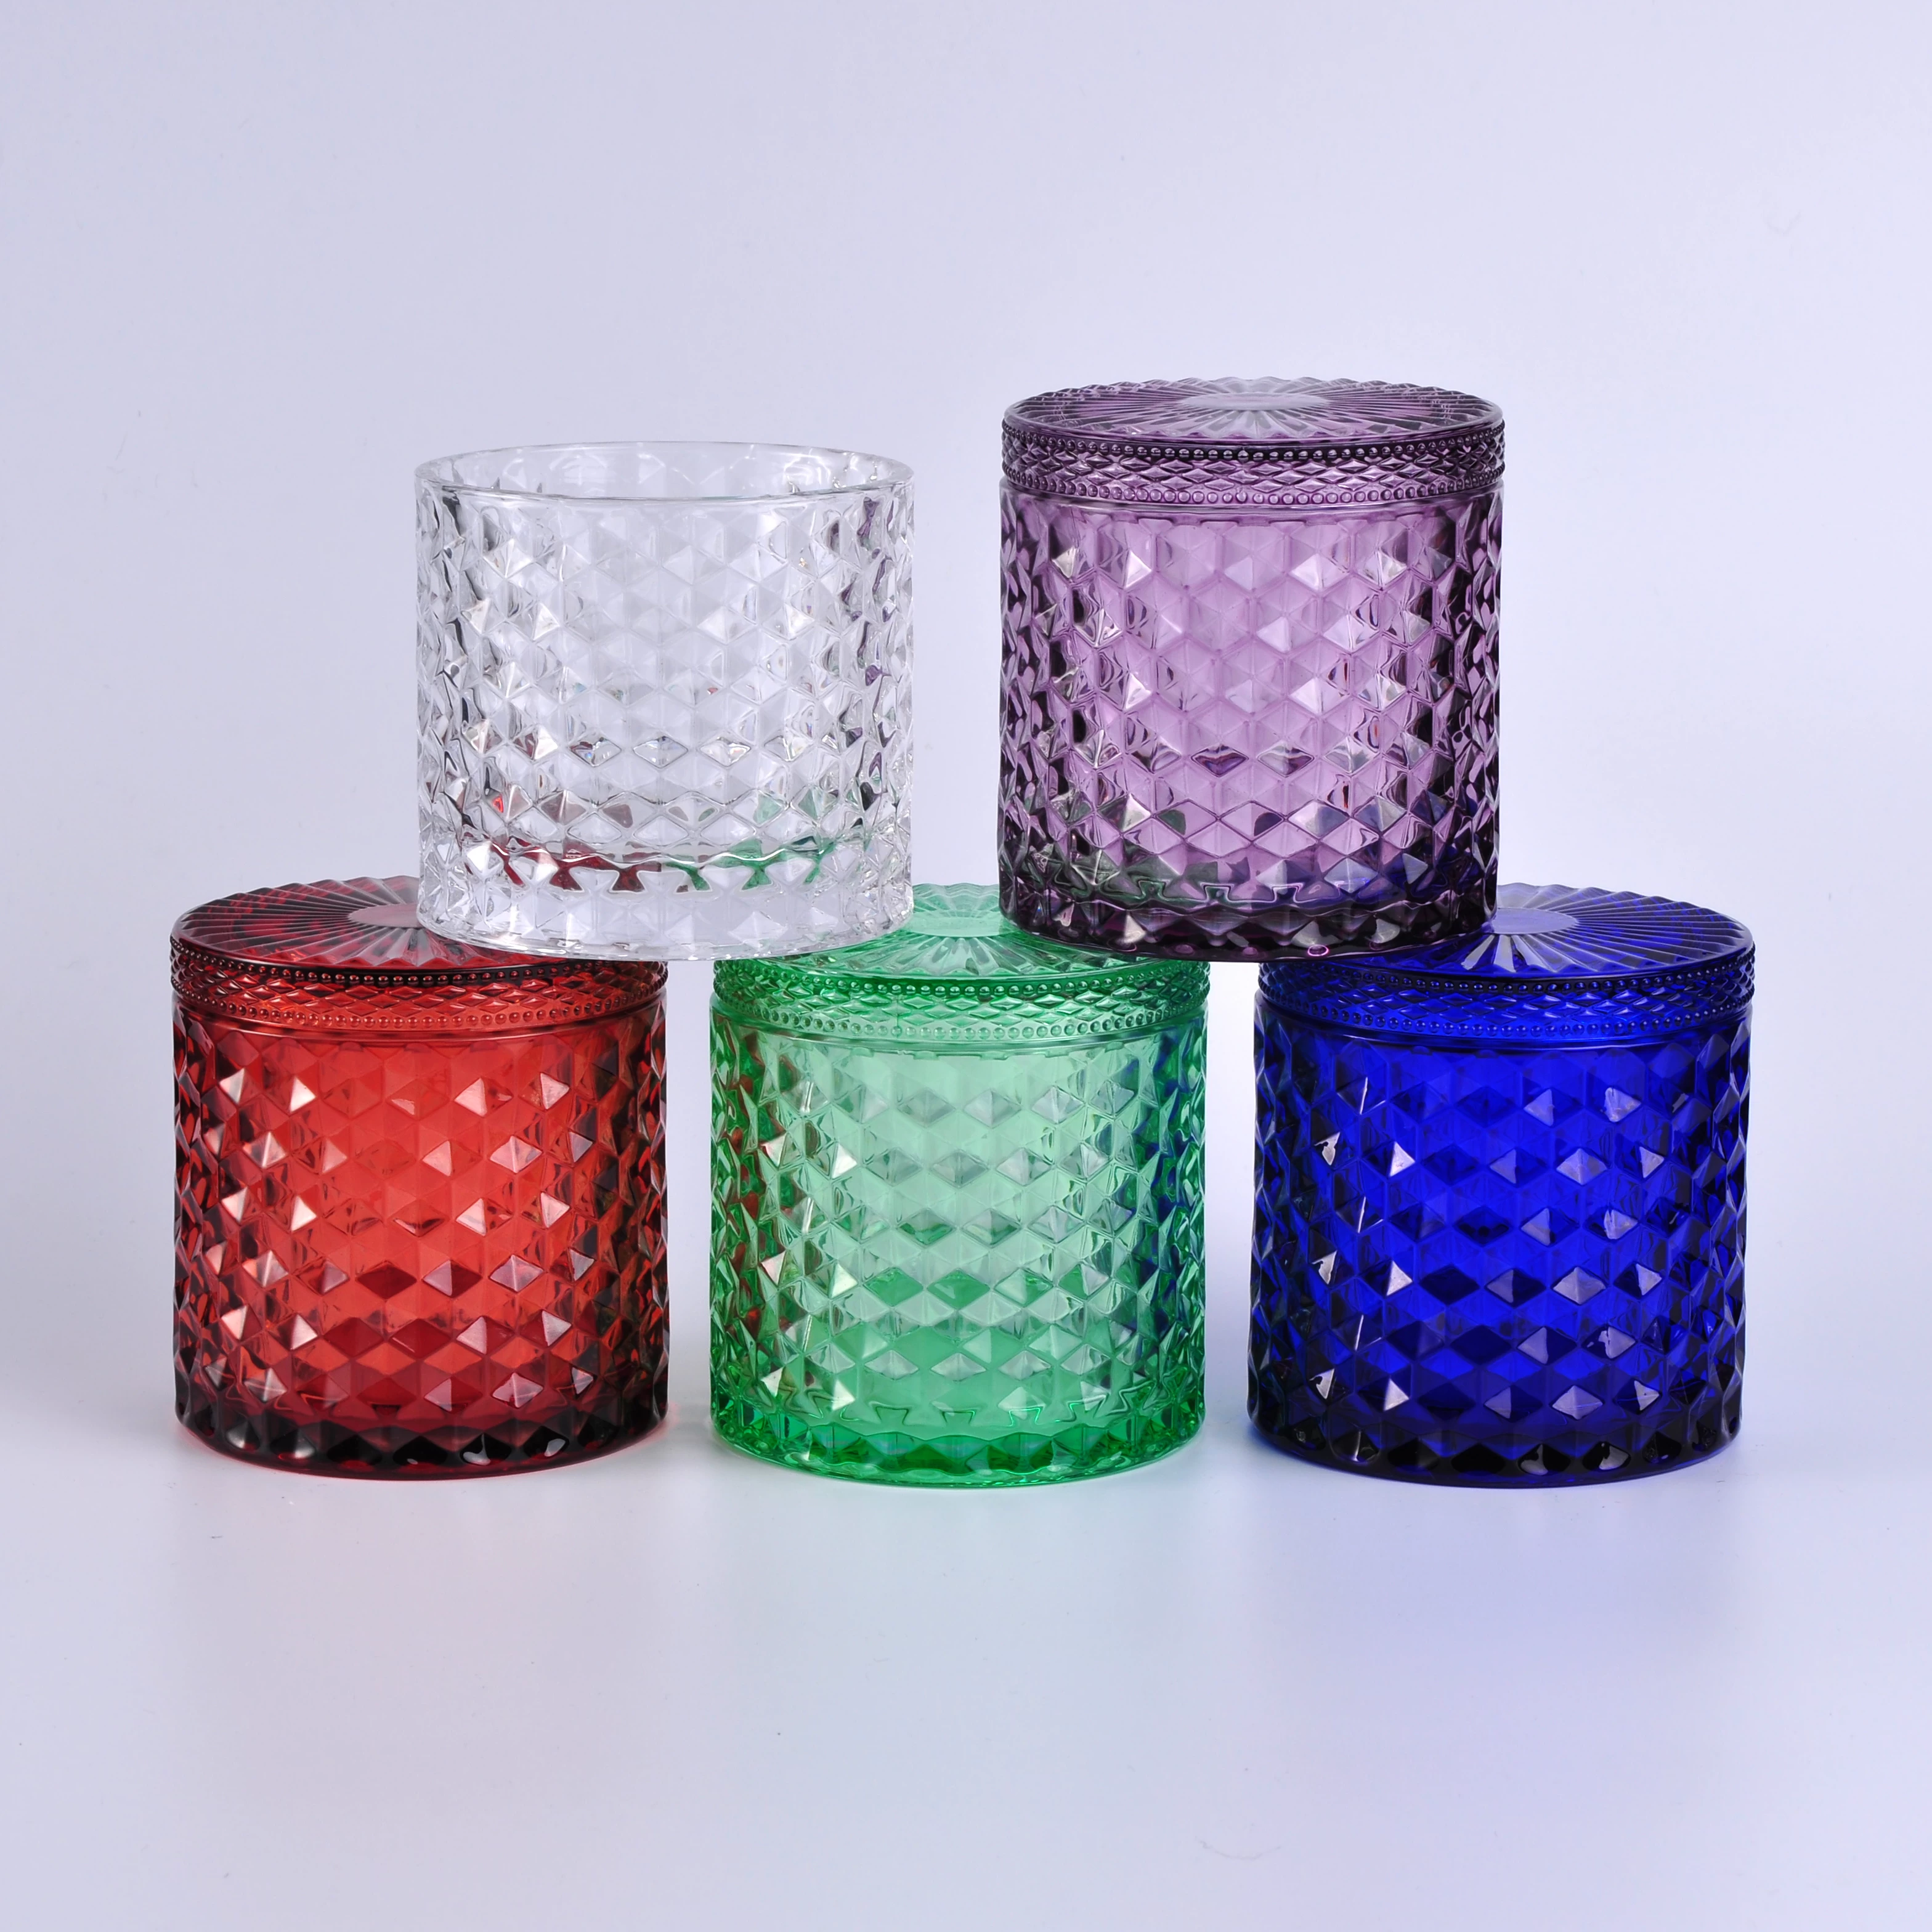 embossed woven pattern glass candle holders from Sunny Glassware